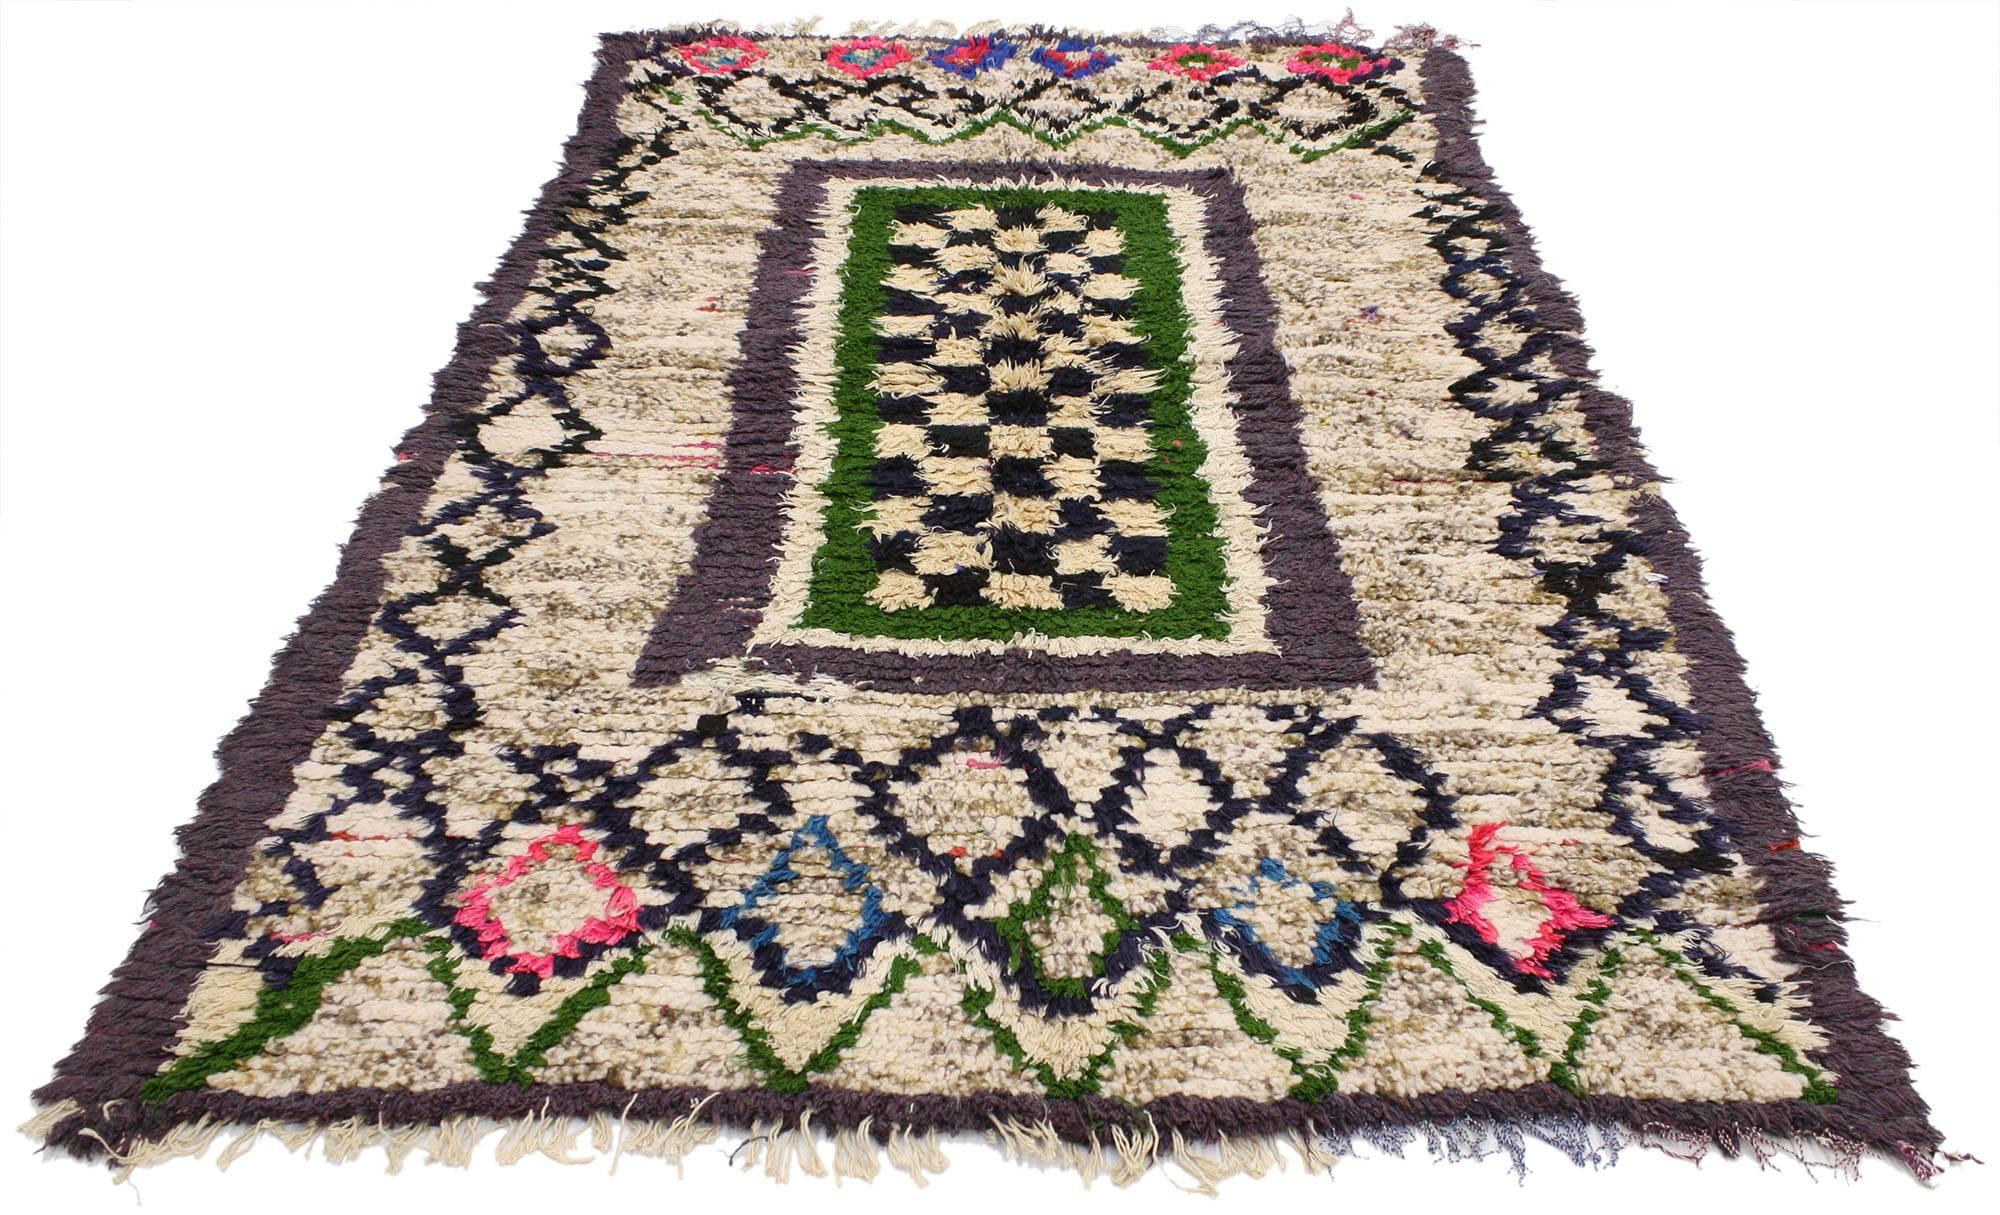 20569 vintage Berber Moroccan Boucherouite rug. The subtlety of a cream colored background allows the stark colors used to ornament the Berber Moroccan rug to stand out. A myriad of different geometric shapes and themes decorate the foreground of